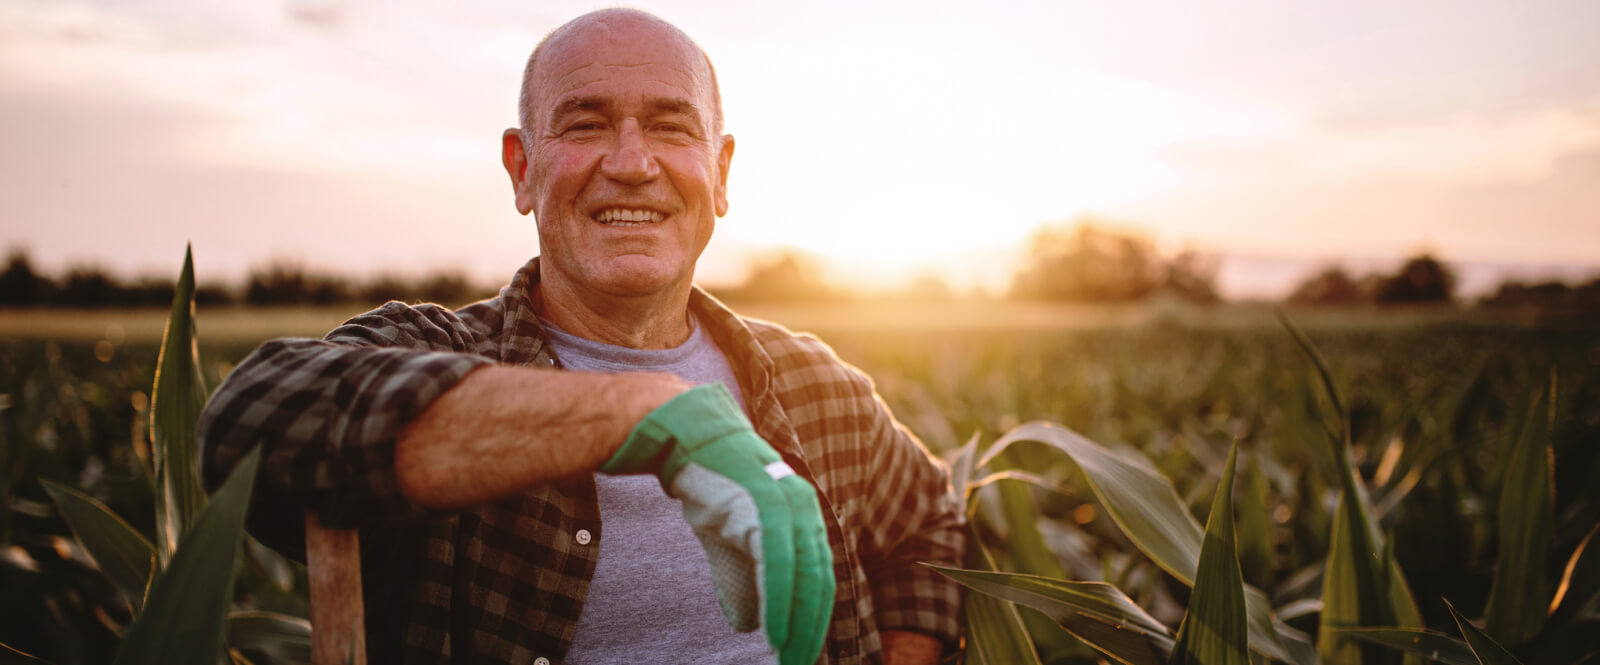 Older man standing in a large field of crops